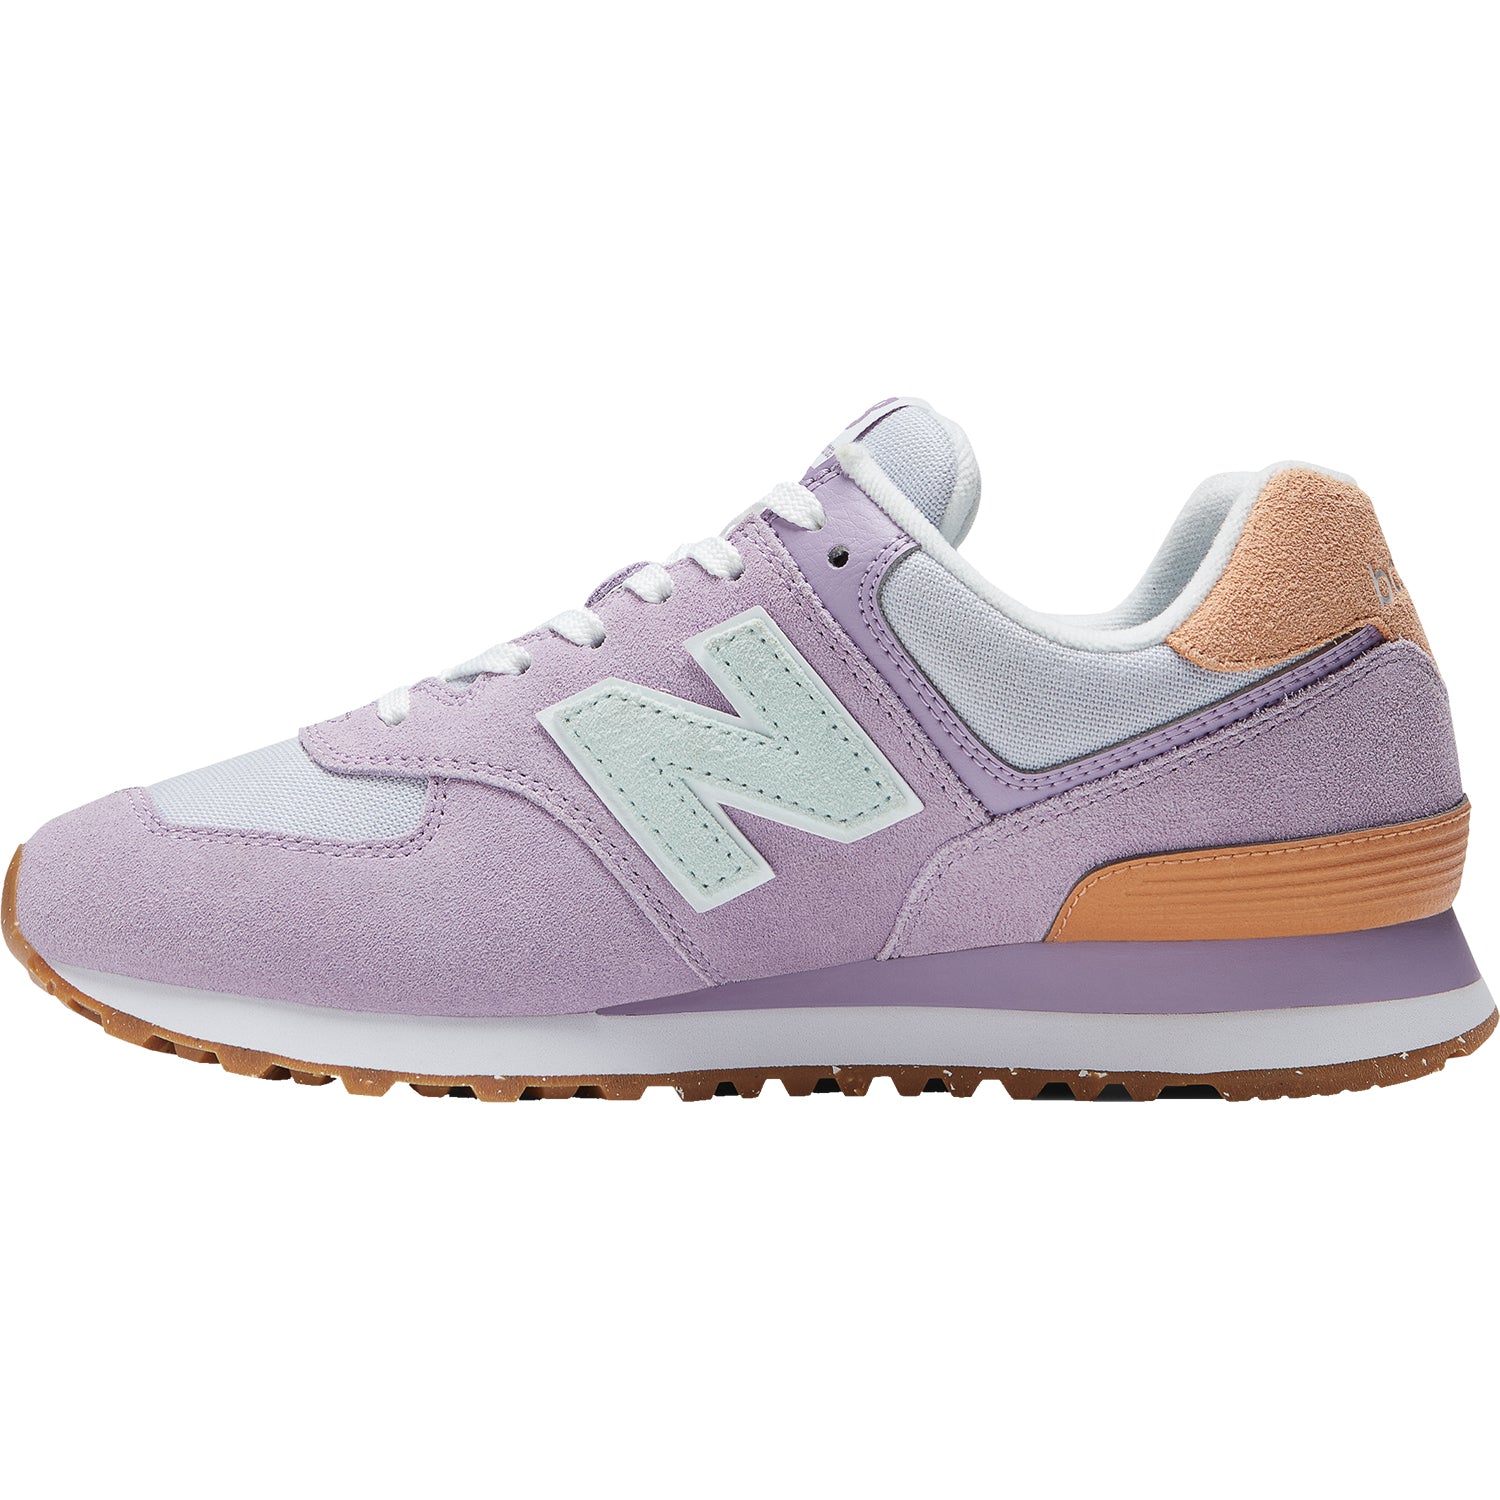 New Balance WL574v2 | Women's Casual Lifestyle Shoes | Footwear etc.